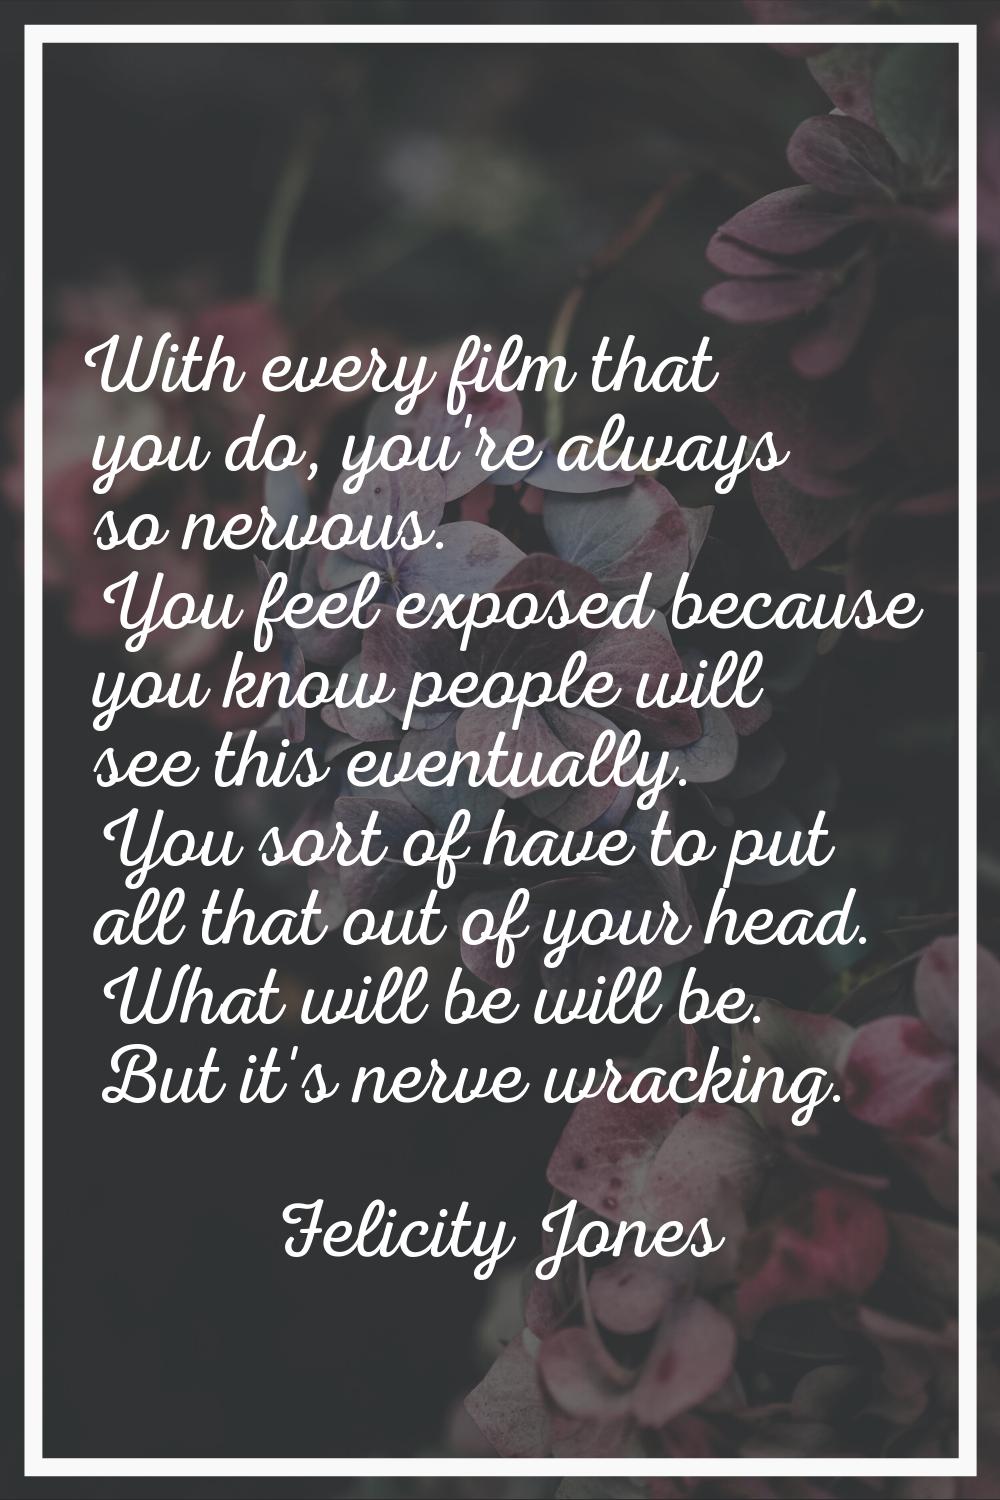 With every film that you do, you're always so nervous. You feel exposed because you know people wil